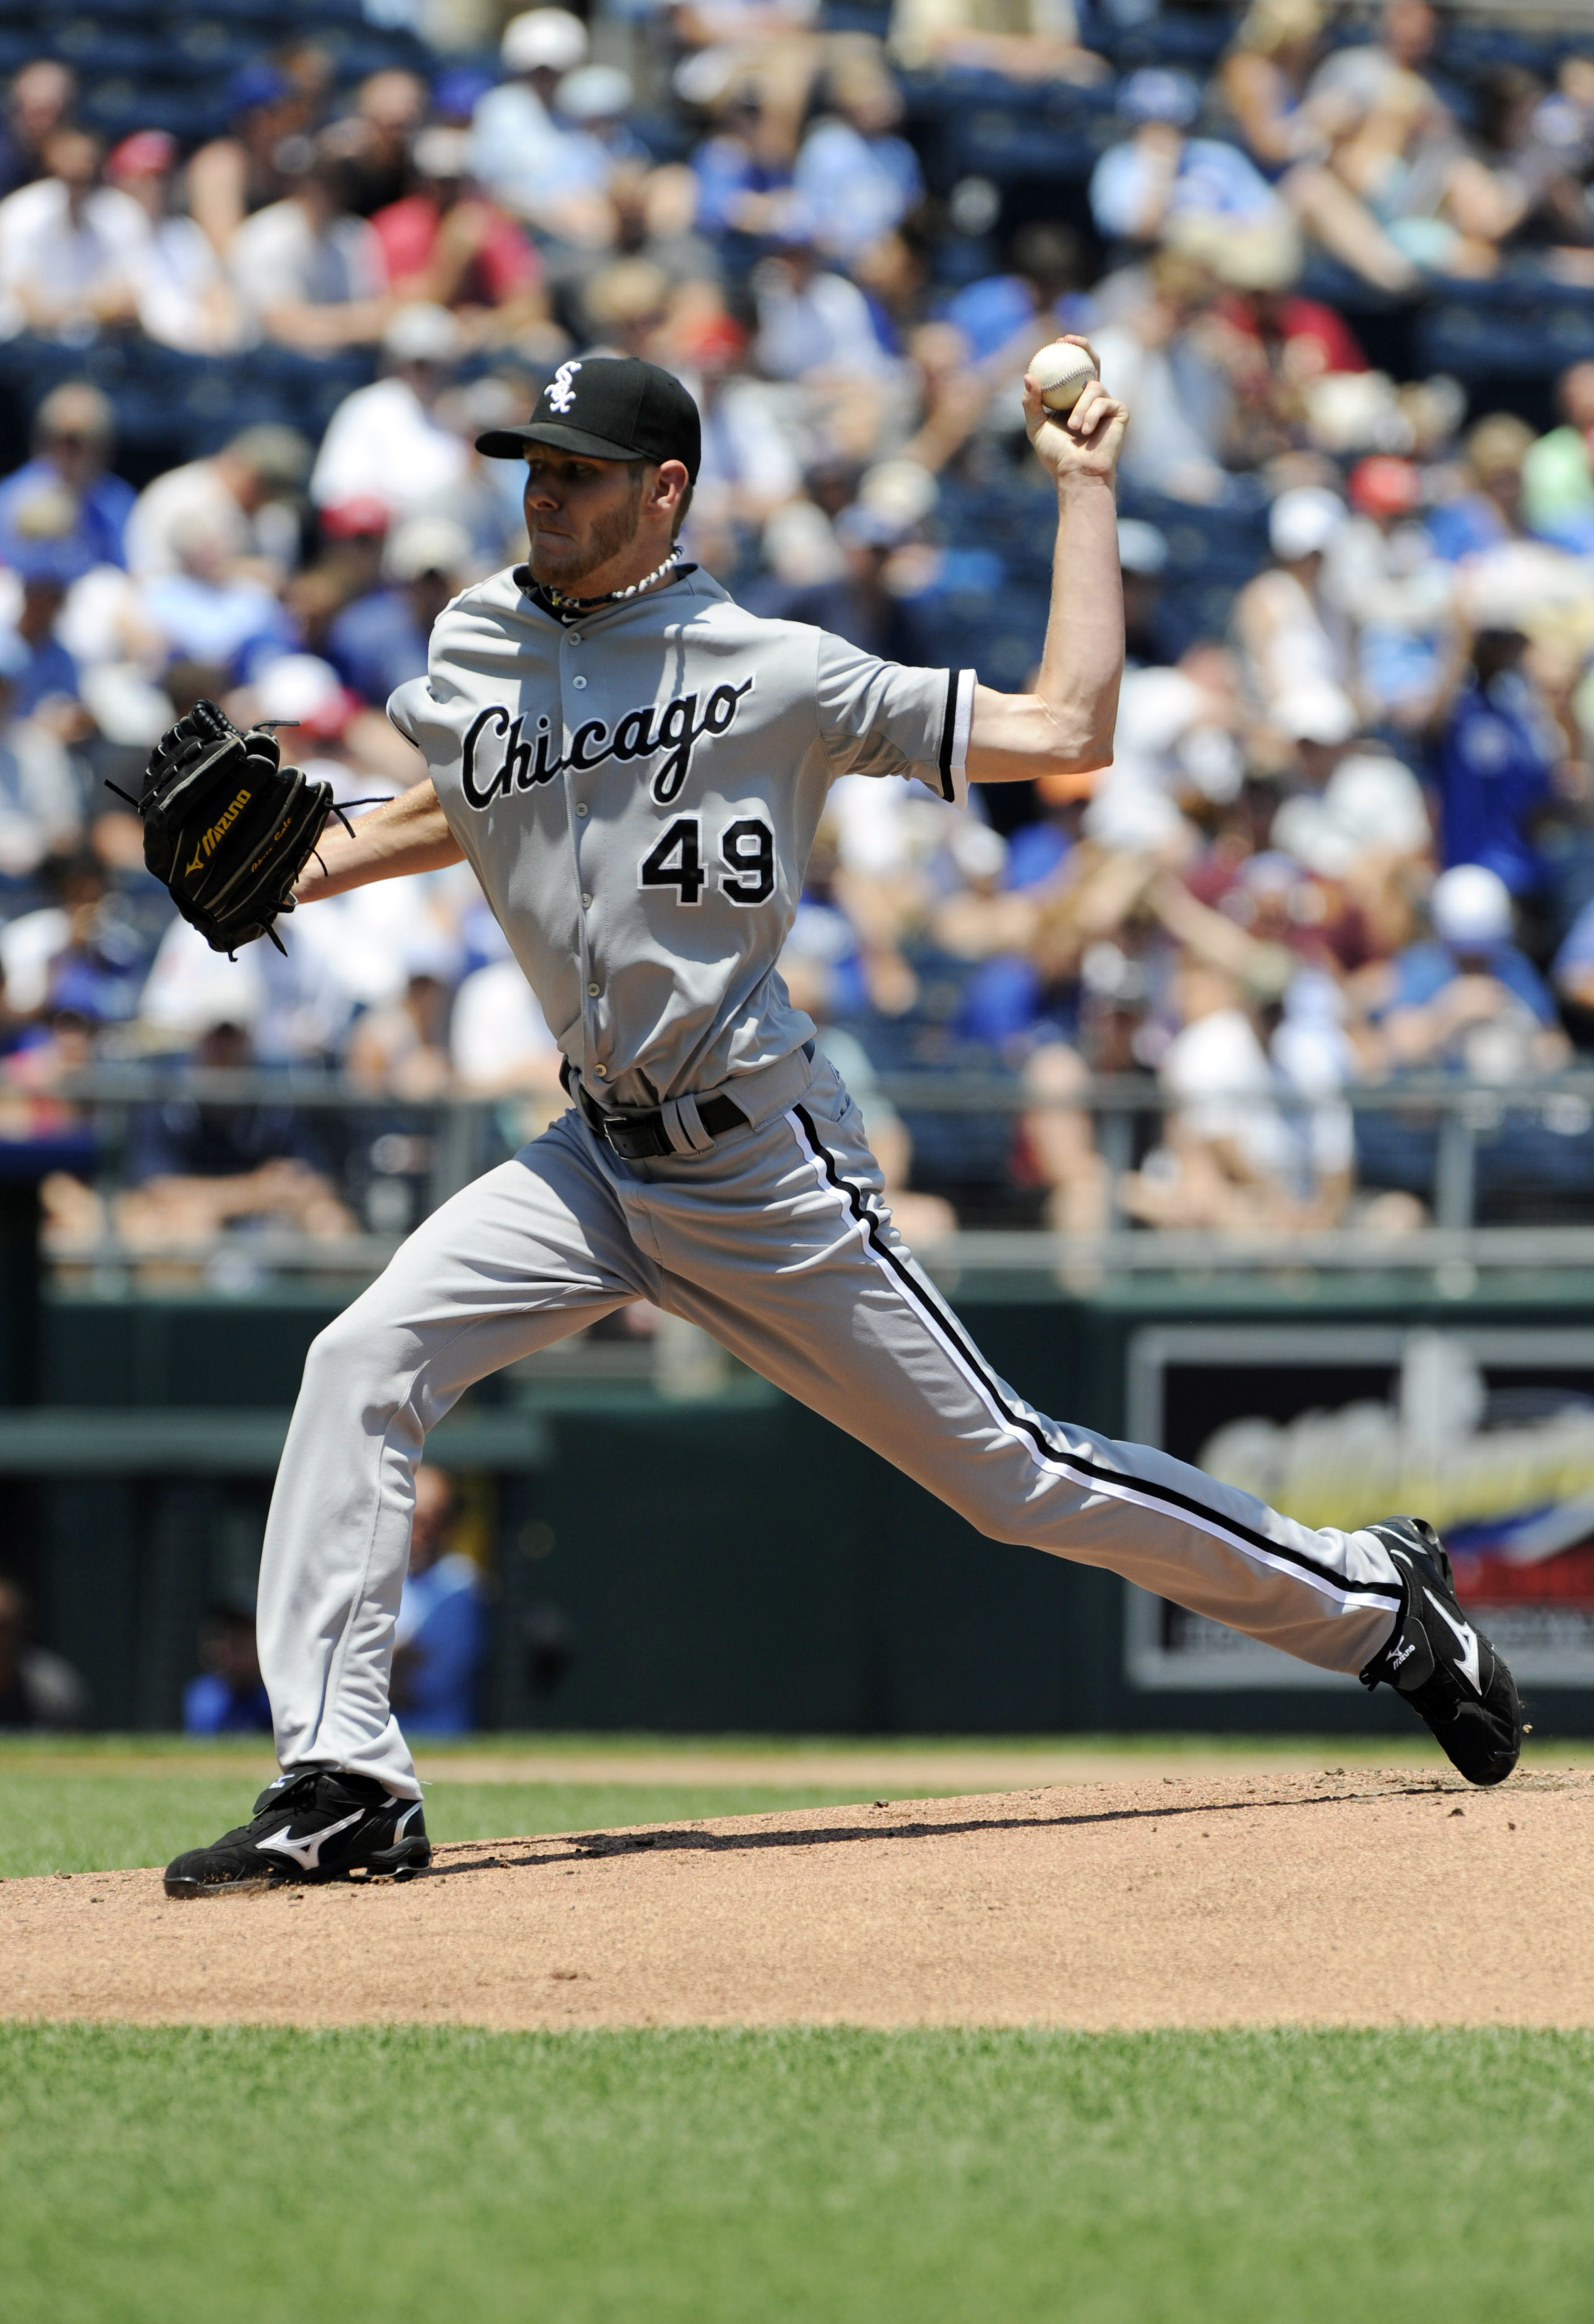 July 15, 2012; Kansas City, MO, USA; Chicago White Sox pitcher Chris Sale (49) delivers a pitch against the Kansas City Royals during the first inning at Kauffman Stadium.  Mandatory Credit: Peter G. Aiken-US PRESSWIRE